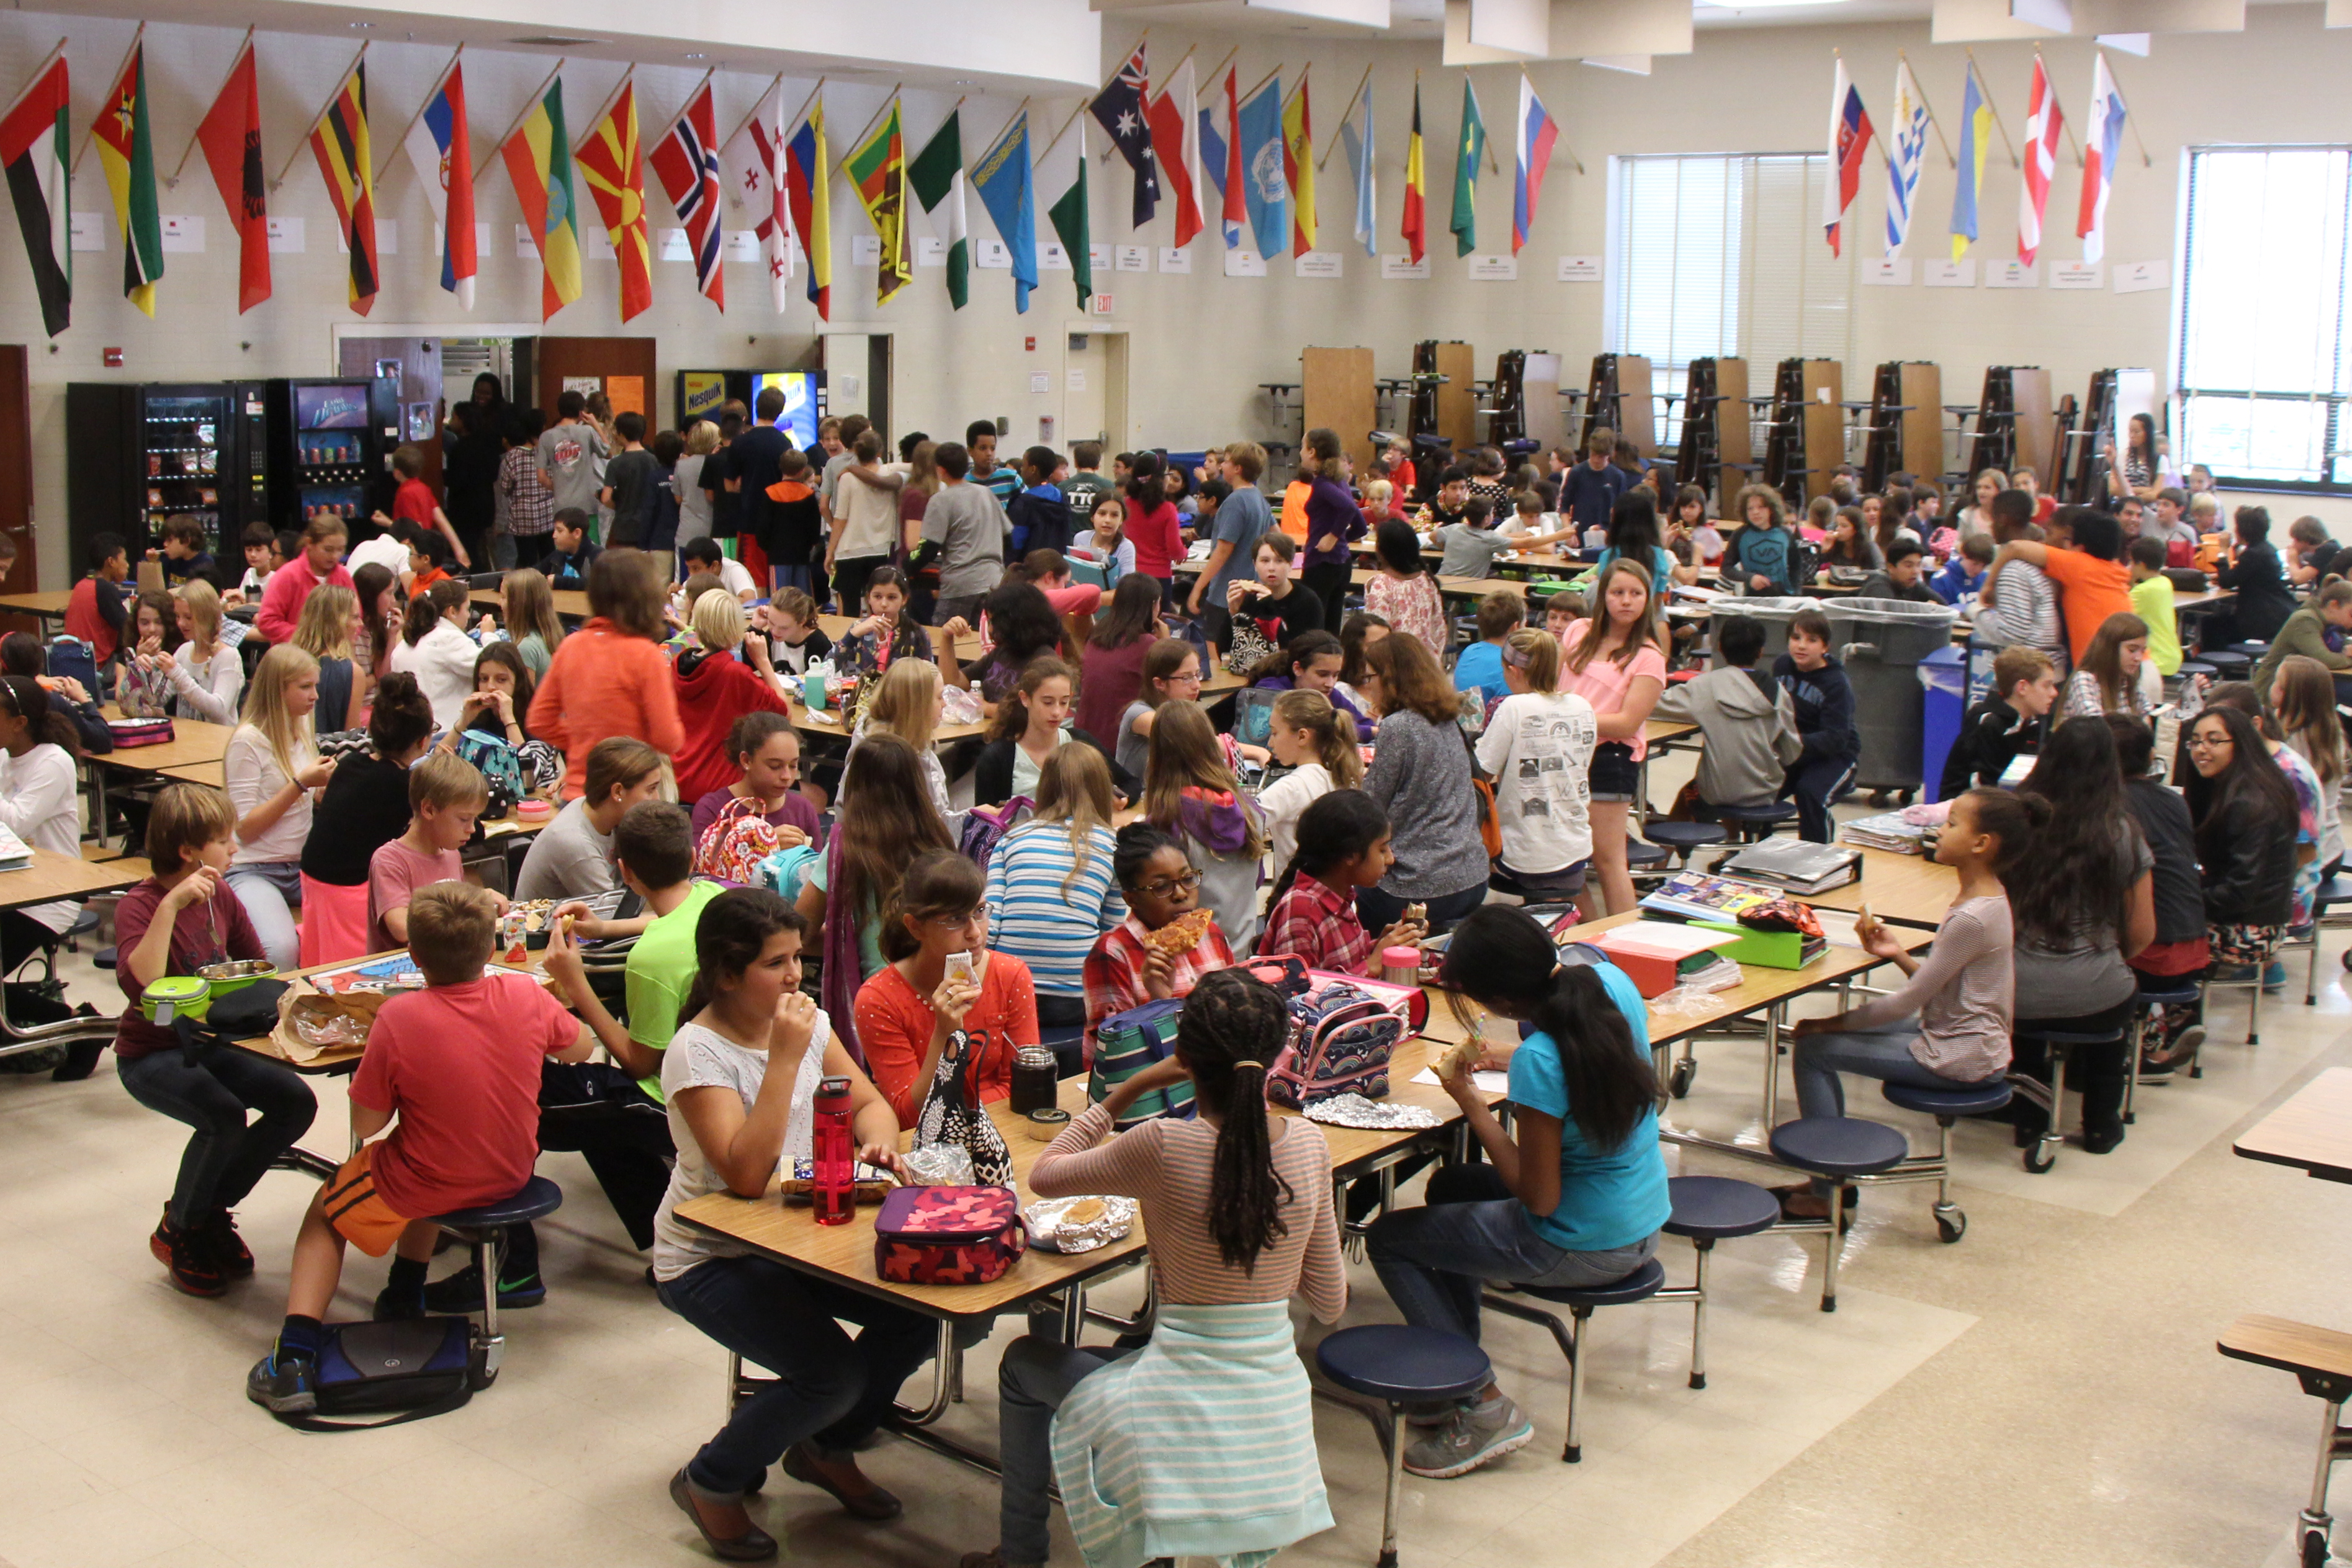 Large cafeteria lunch at a middle school.